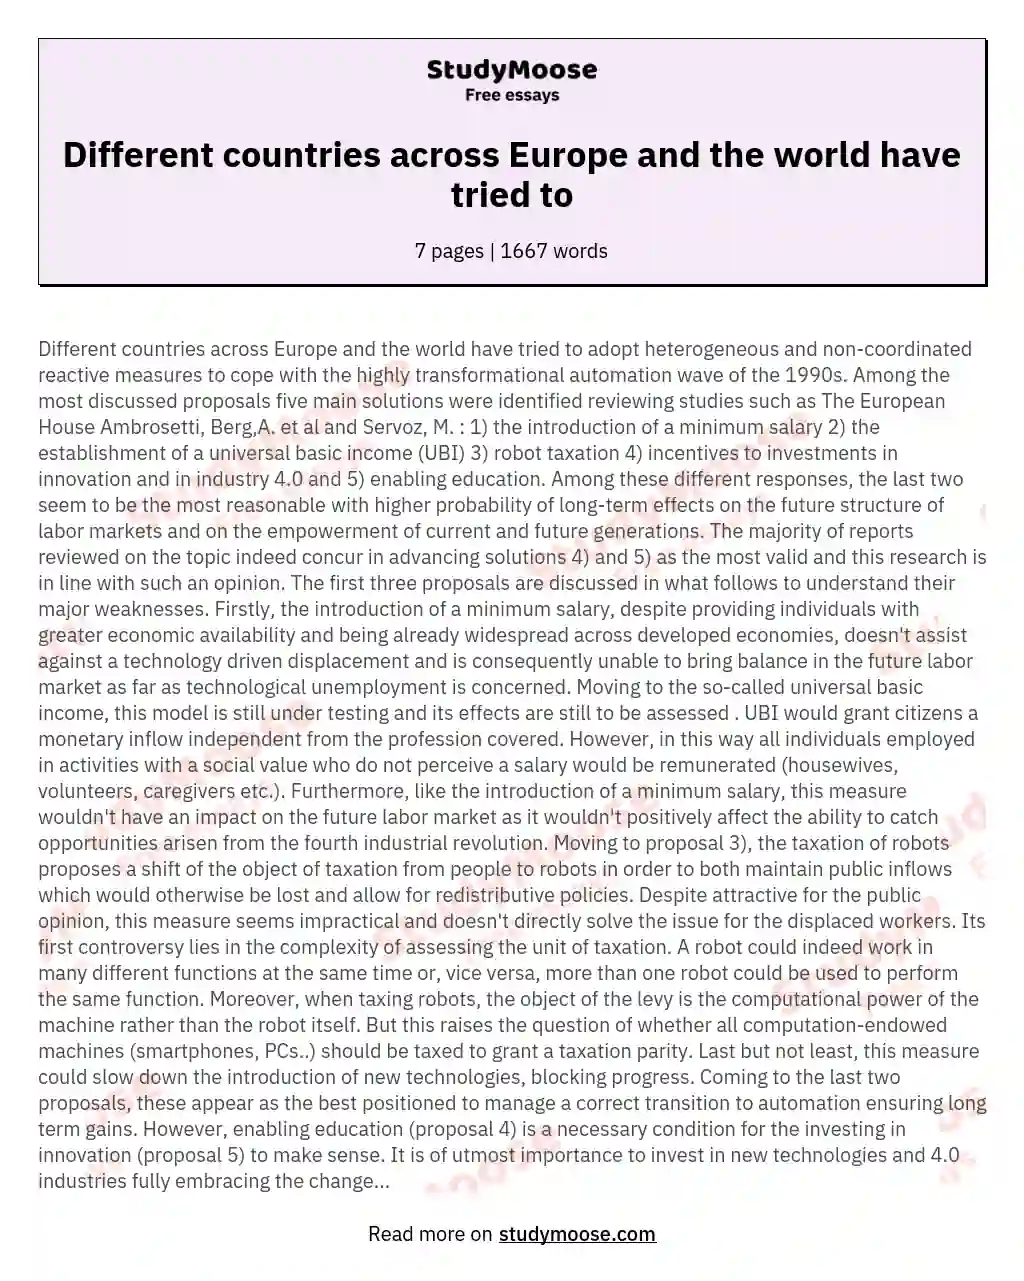 Different countries across Europe and the world have tried to